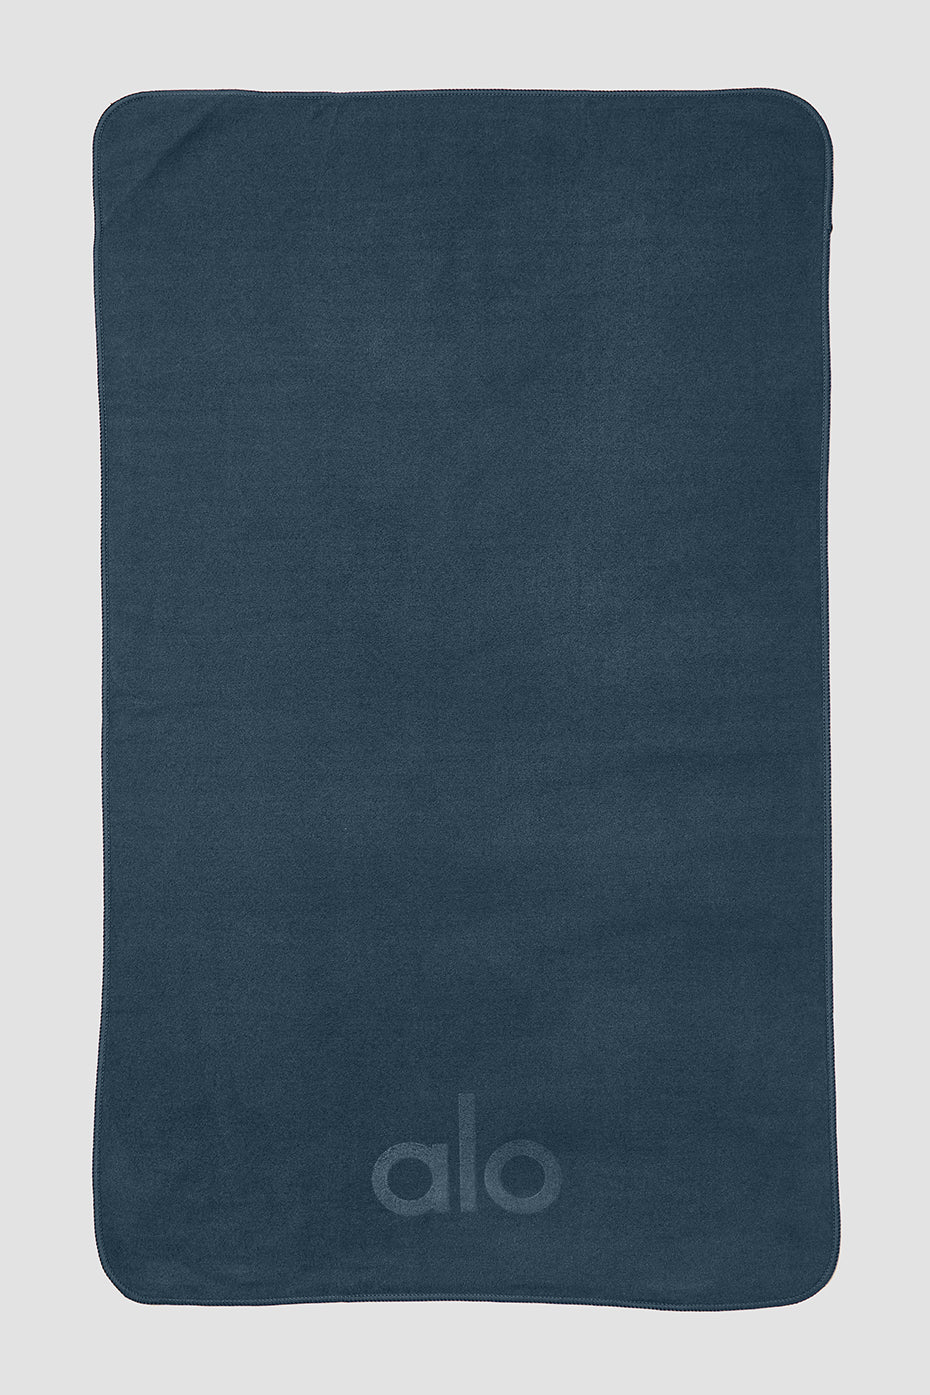 Grounded No-Slip Towel in Black by Alo Yoga